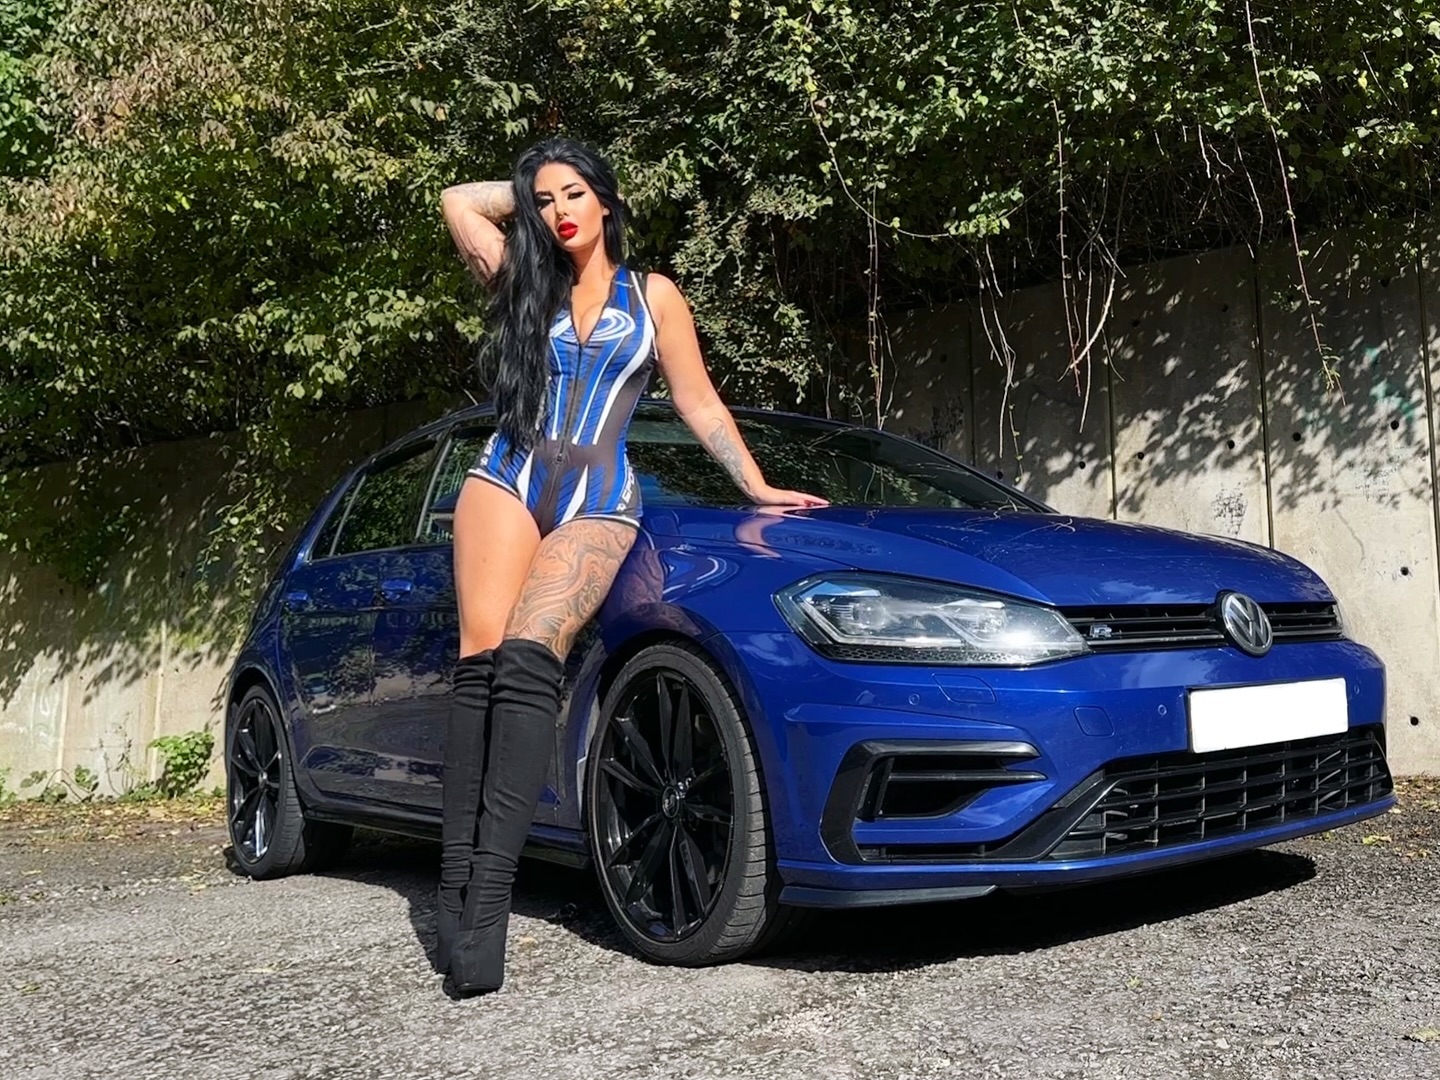 2024 The Year of my Golf 💙

This year I’m going to try something new and give my baby some TLC, give him some slight mods and learn more about him as a car. Little speed demon here💨
#volkswagen #golfr #golfrmk75 #lapizbluegolfr #cars #cargirl